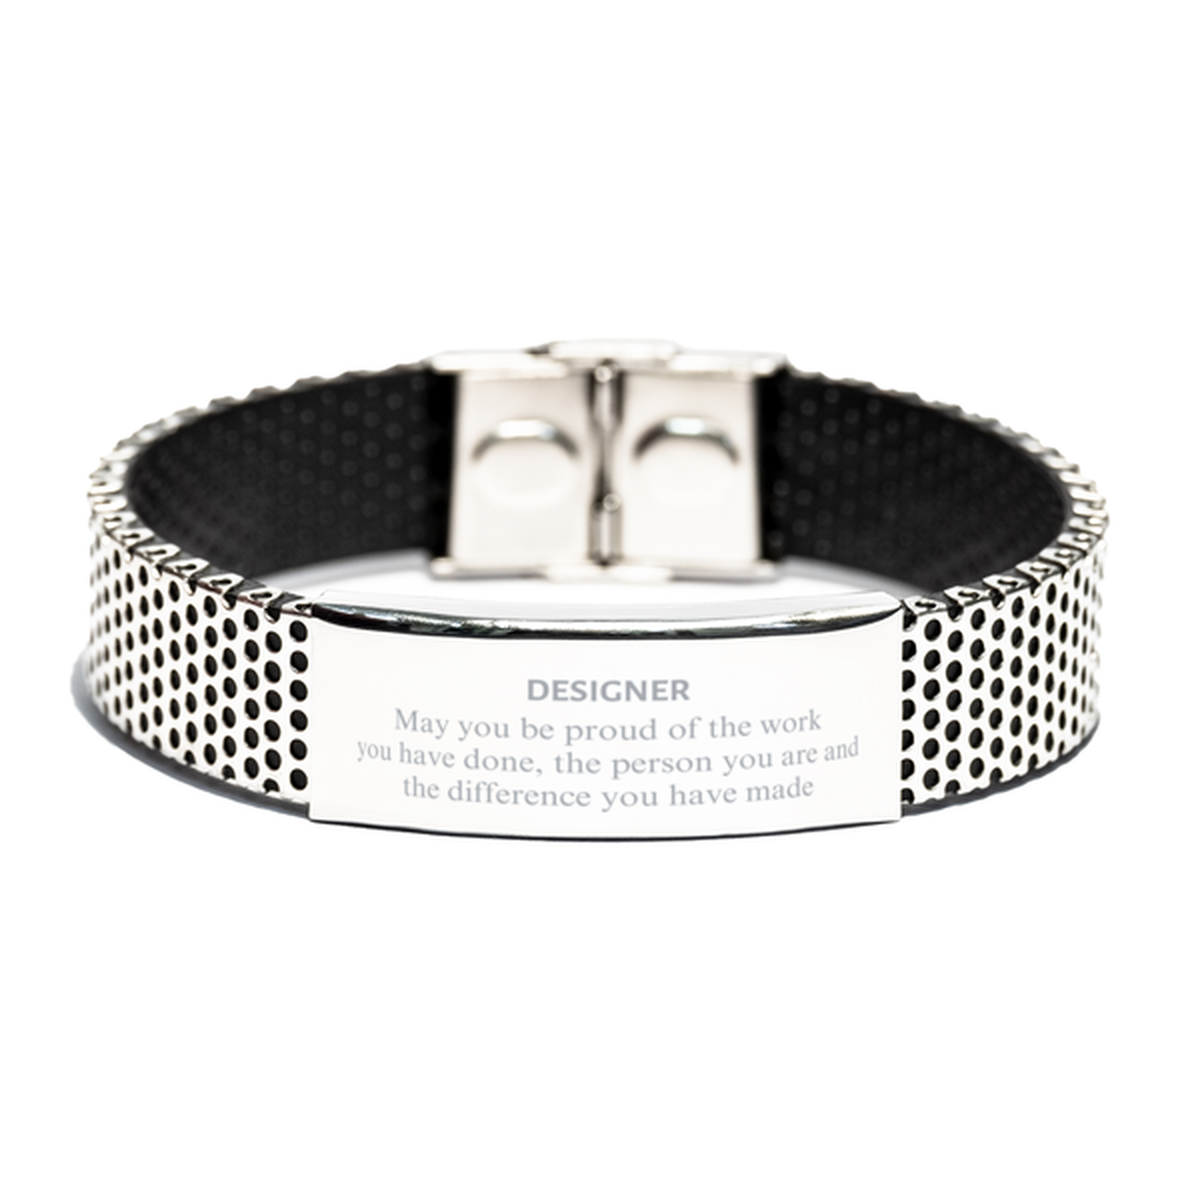 Designer May you be proud of the work you have done, Retirement Designer Stainless Steel Bracelet for Colleague Appreciation Gifts Amazing for Designer